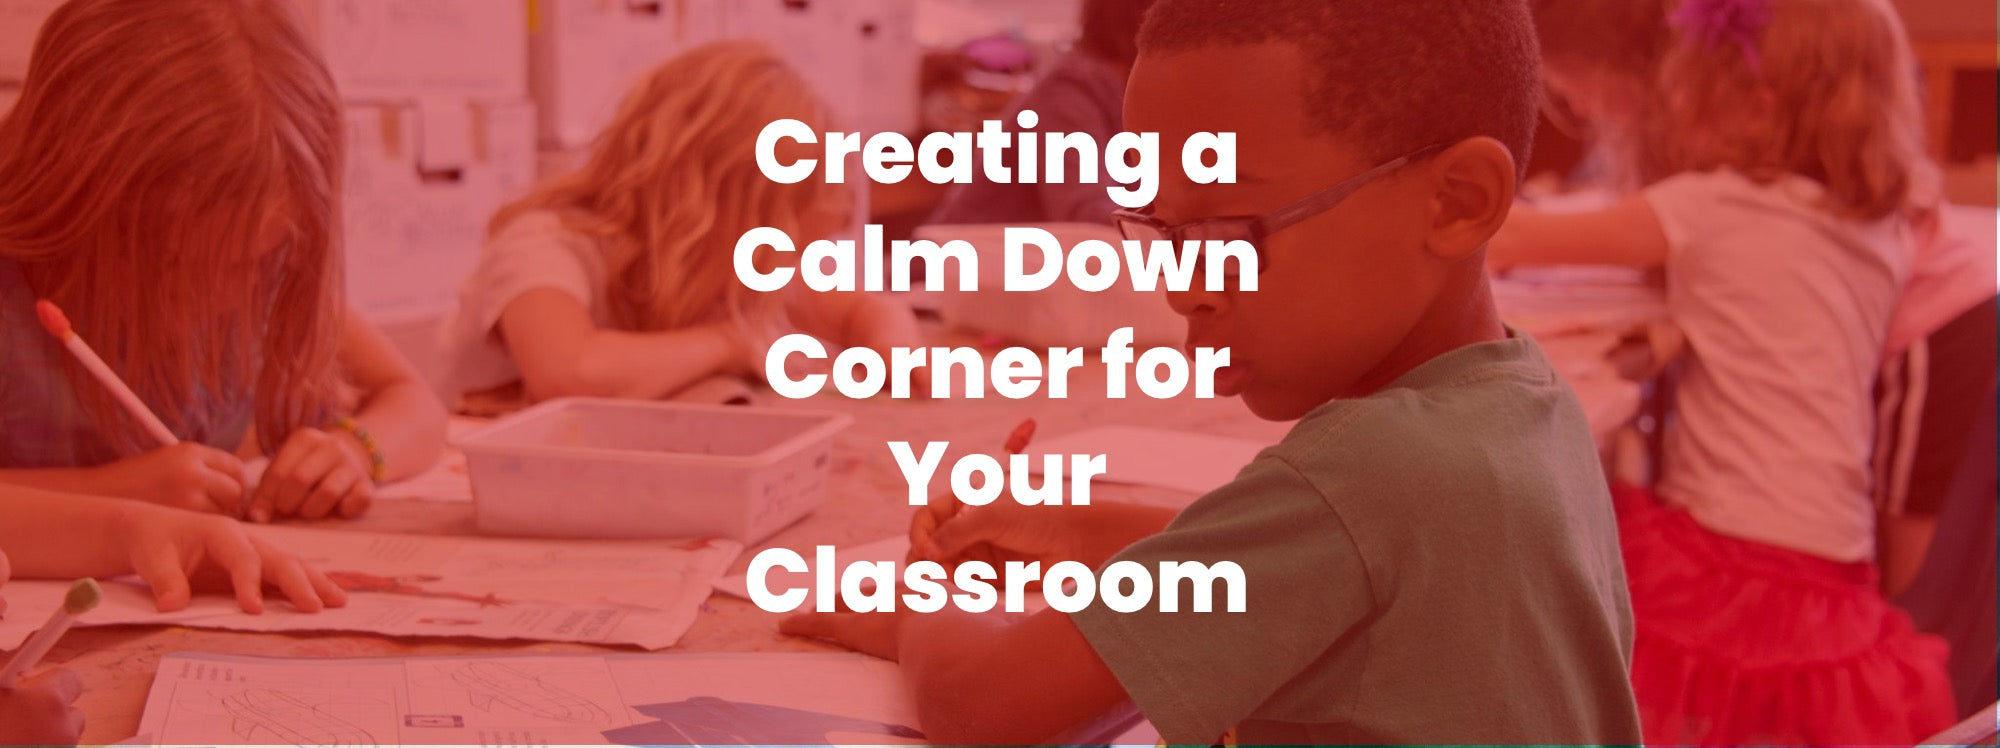 Creating a Calm Down Corner for Your Classroom